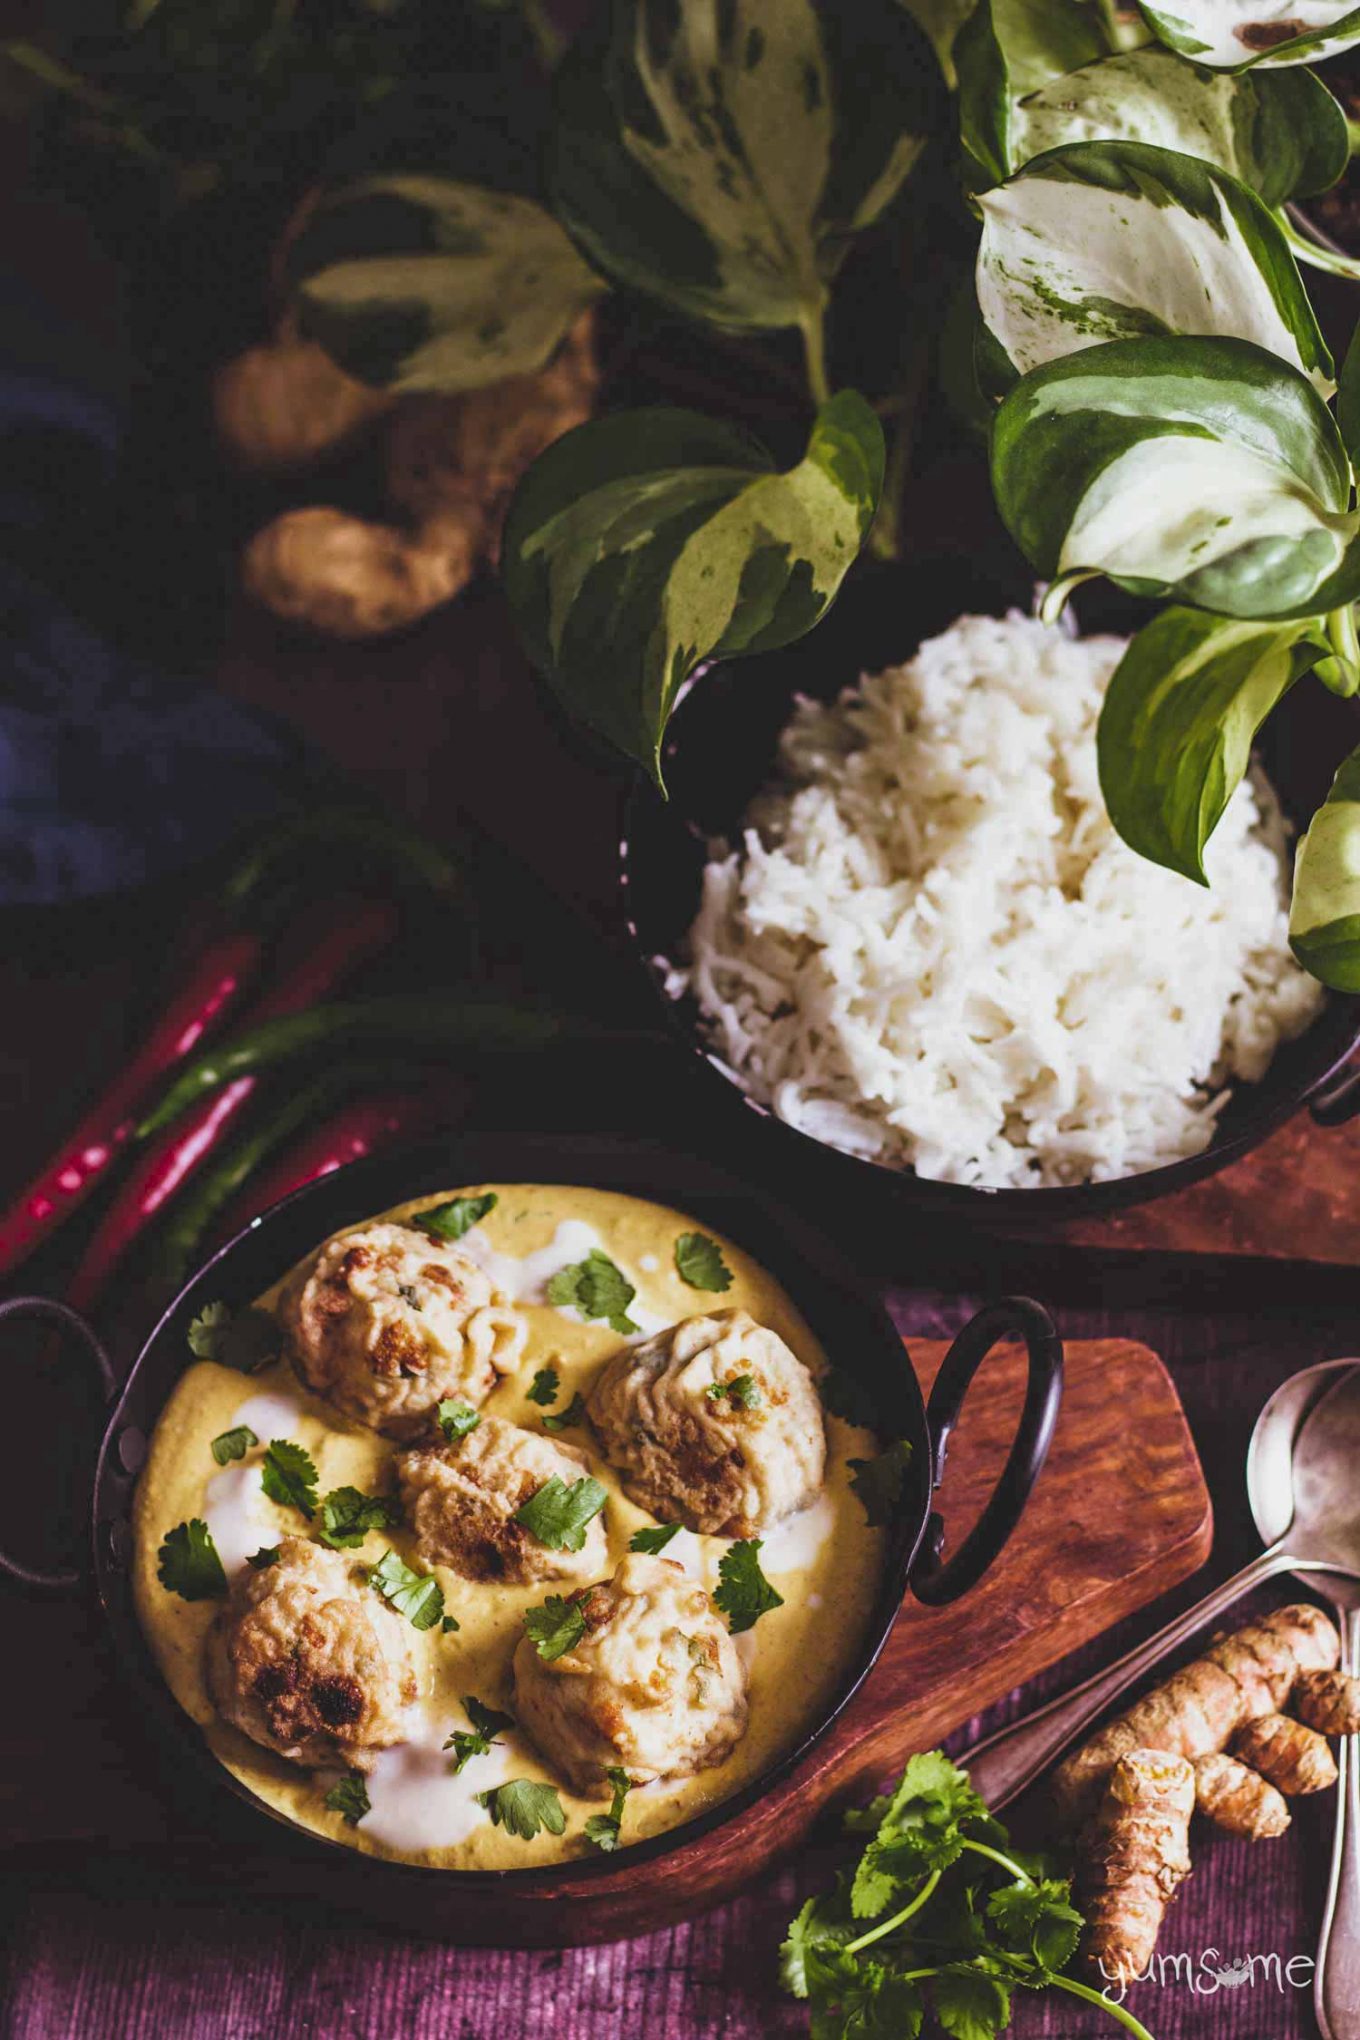 Two bowls of malai kofte and rice on a wooden table.